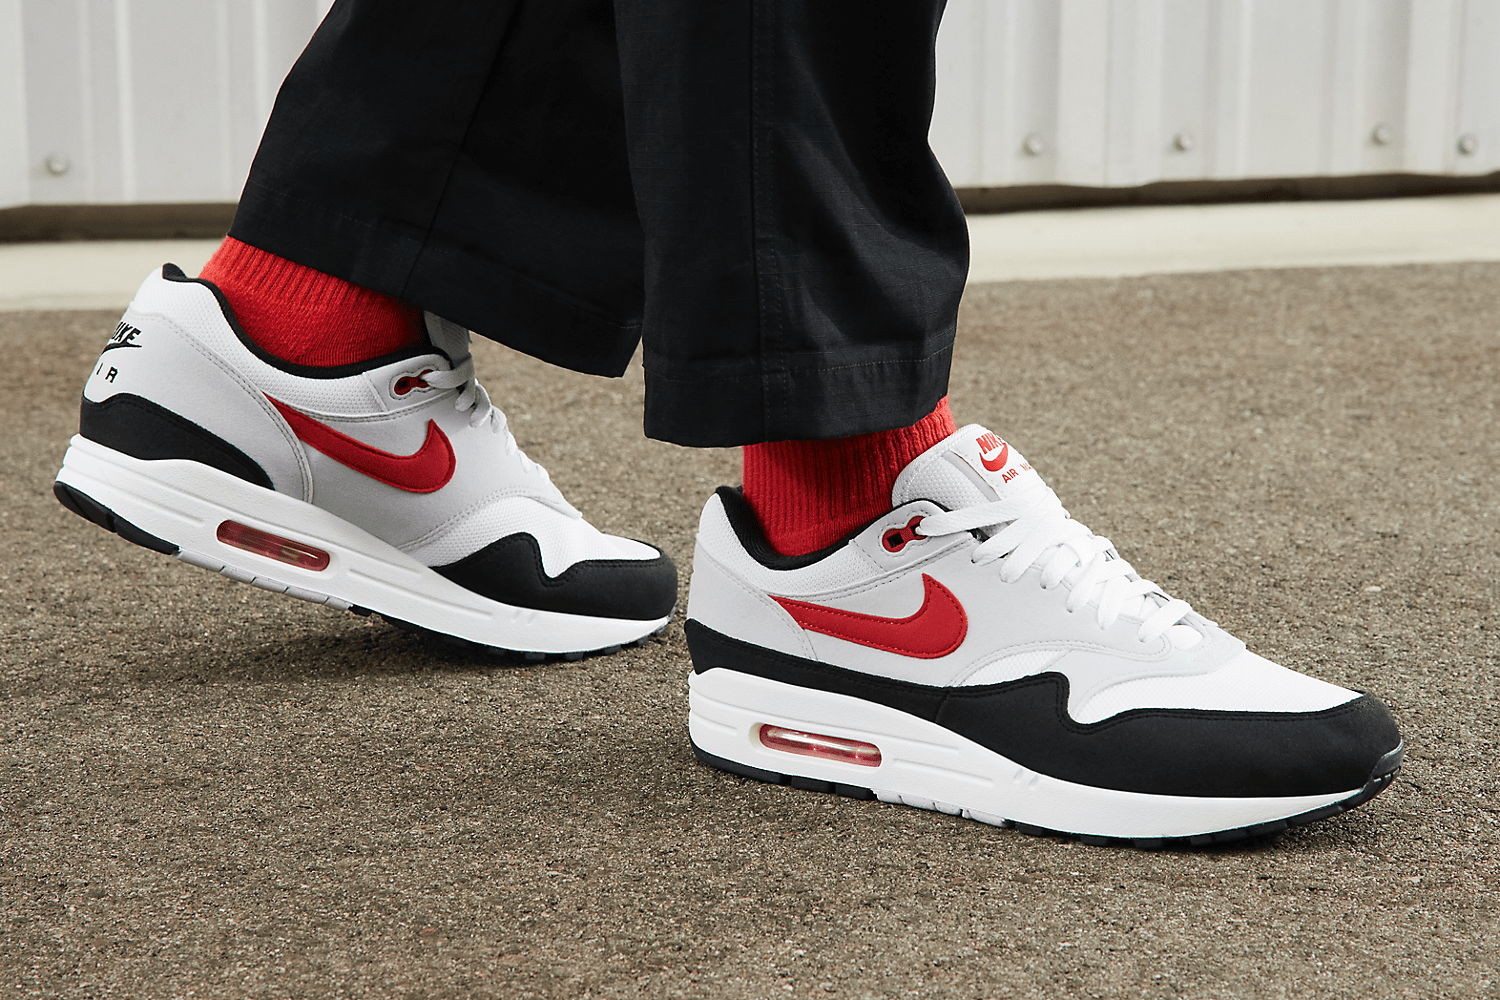 Check out the 10 most popular Nike Air Max 1 colorways right now